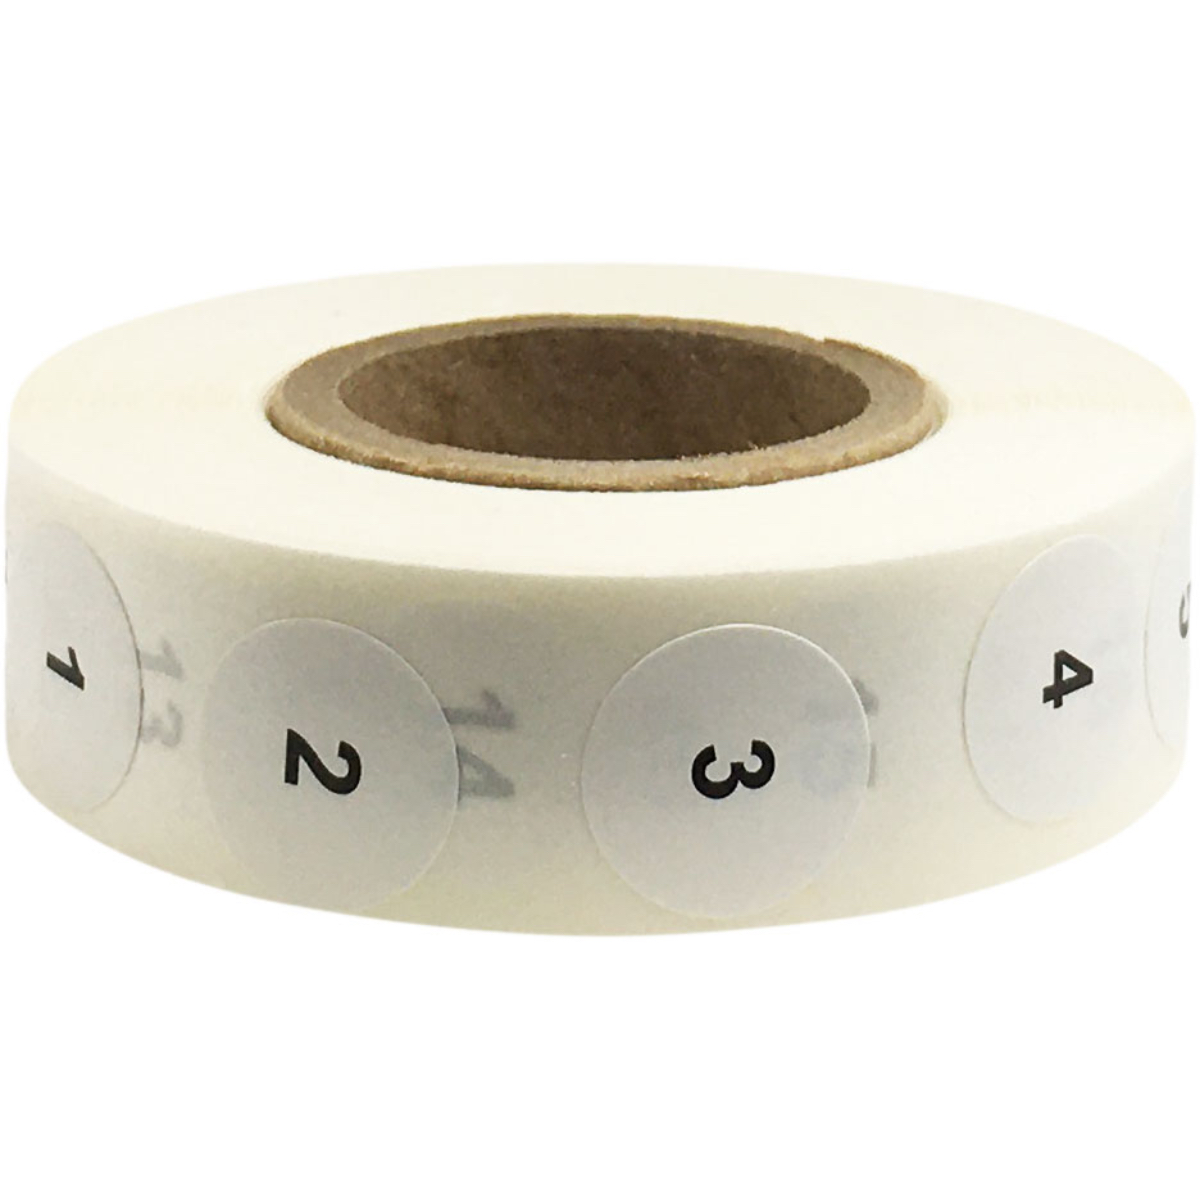 1000 Total Labels 1 Label per Number White with Black 1-1000 Consecutive Number Stickers 3/4 Inch x 1 1/2 Inch Wide 